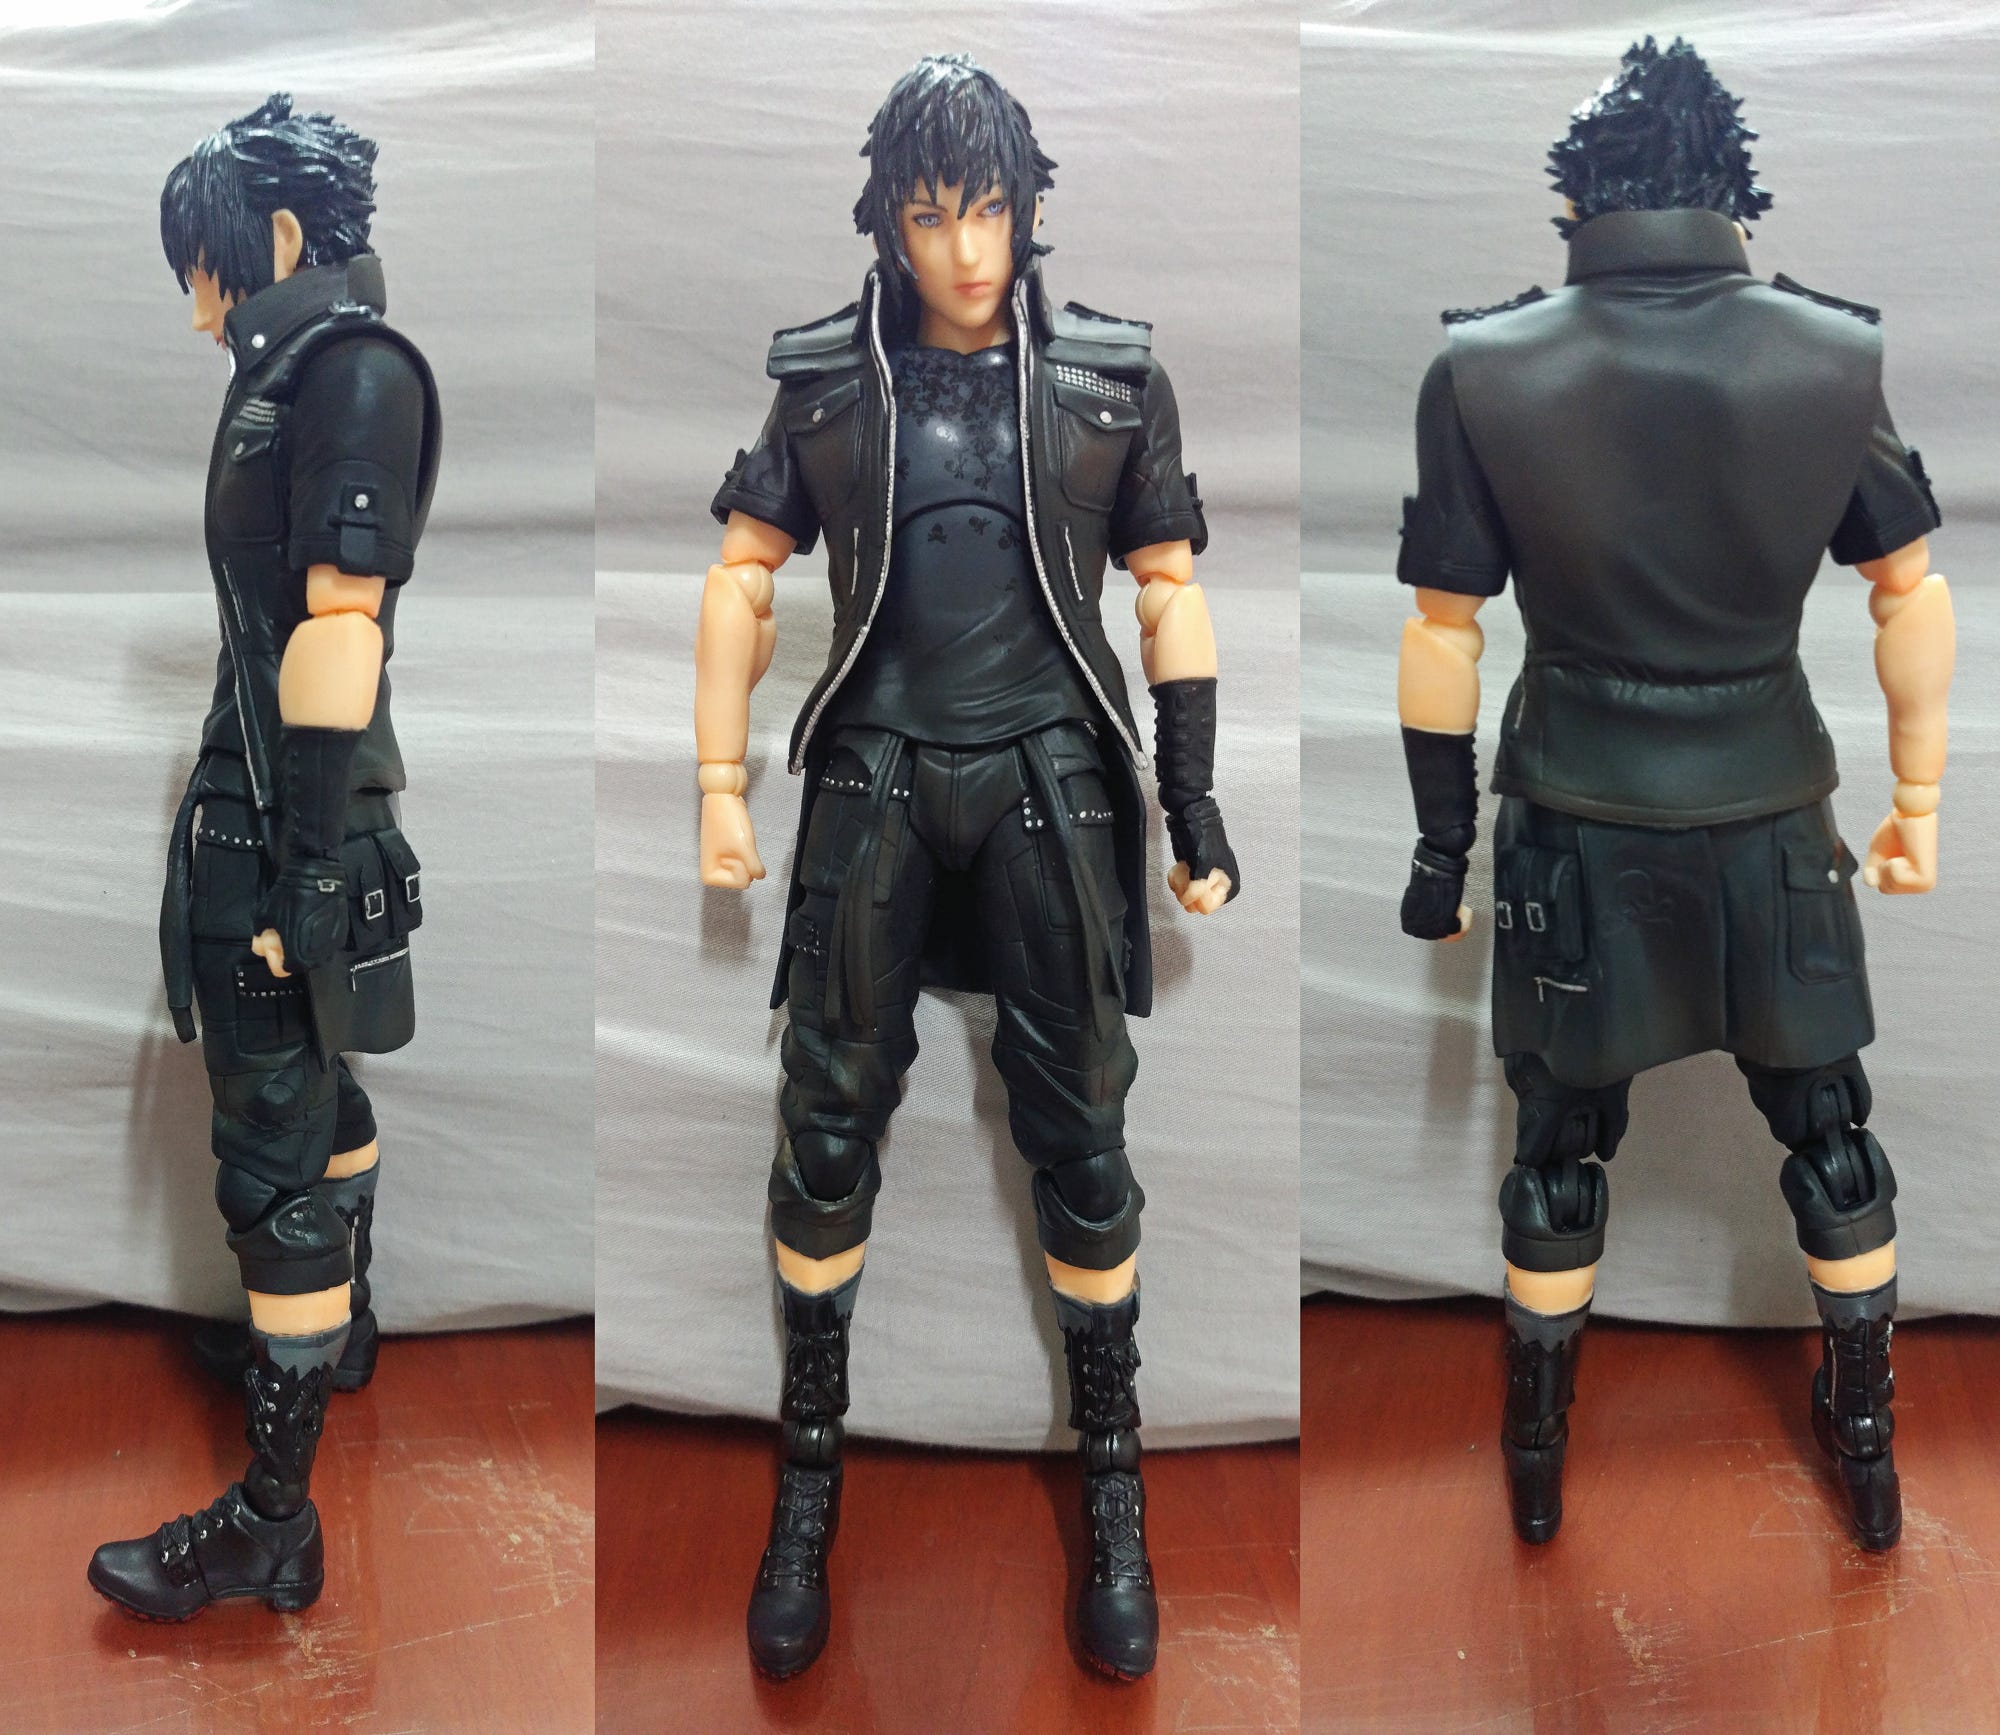 play arts kai noctis ultimate collector's edition